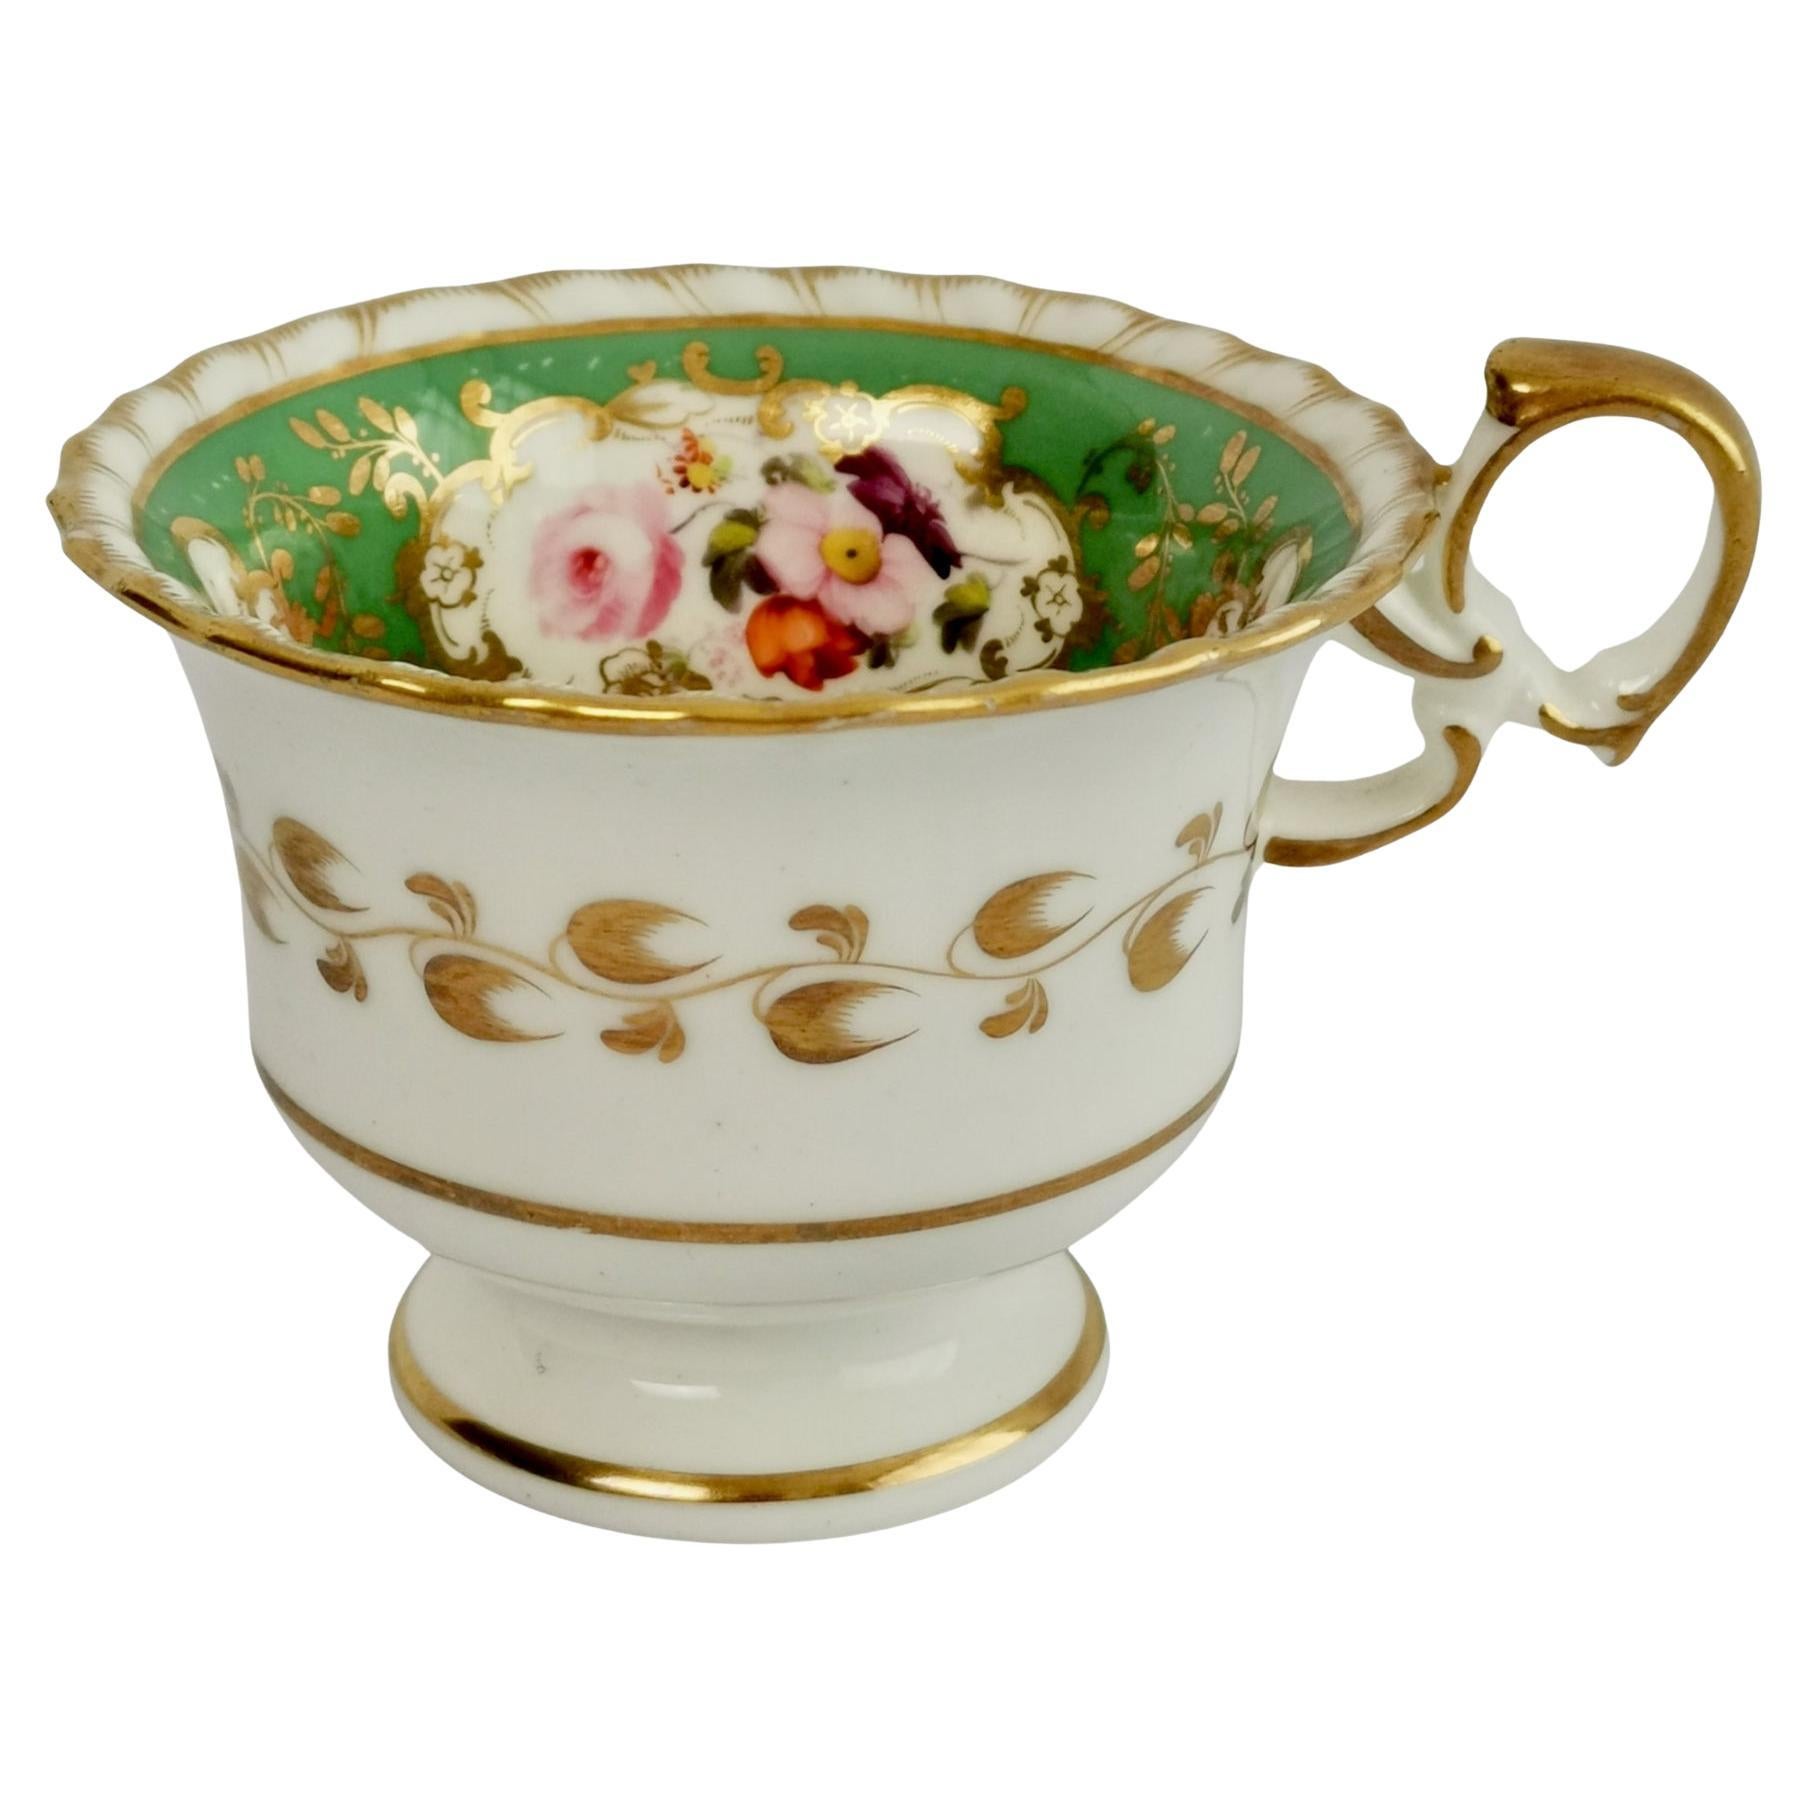 Minton Porcelain Orphaned Coffee Cup, Green with Flowers, ca 1825